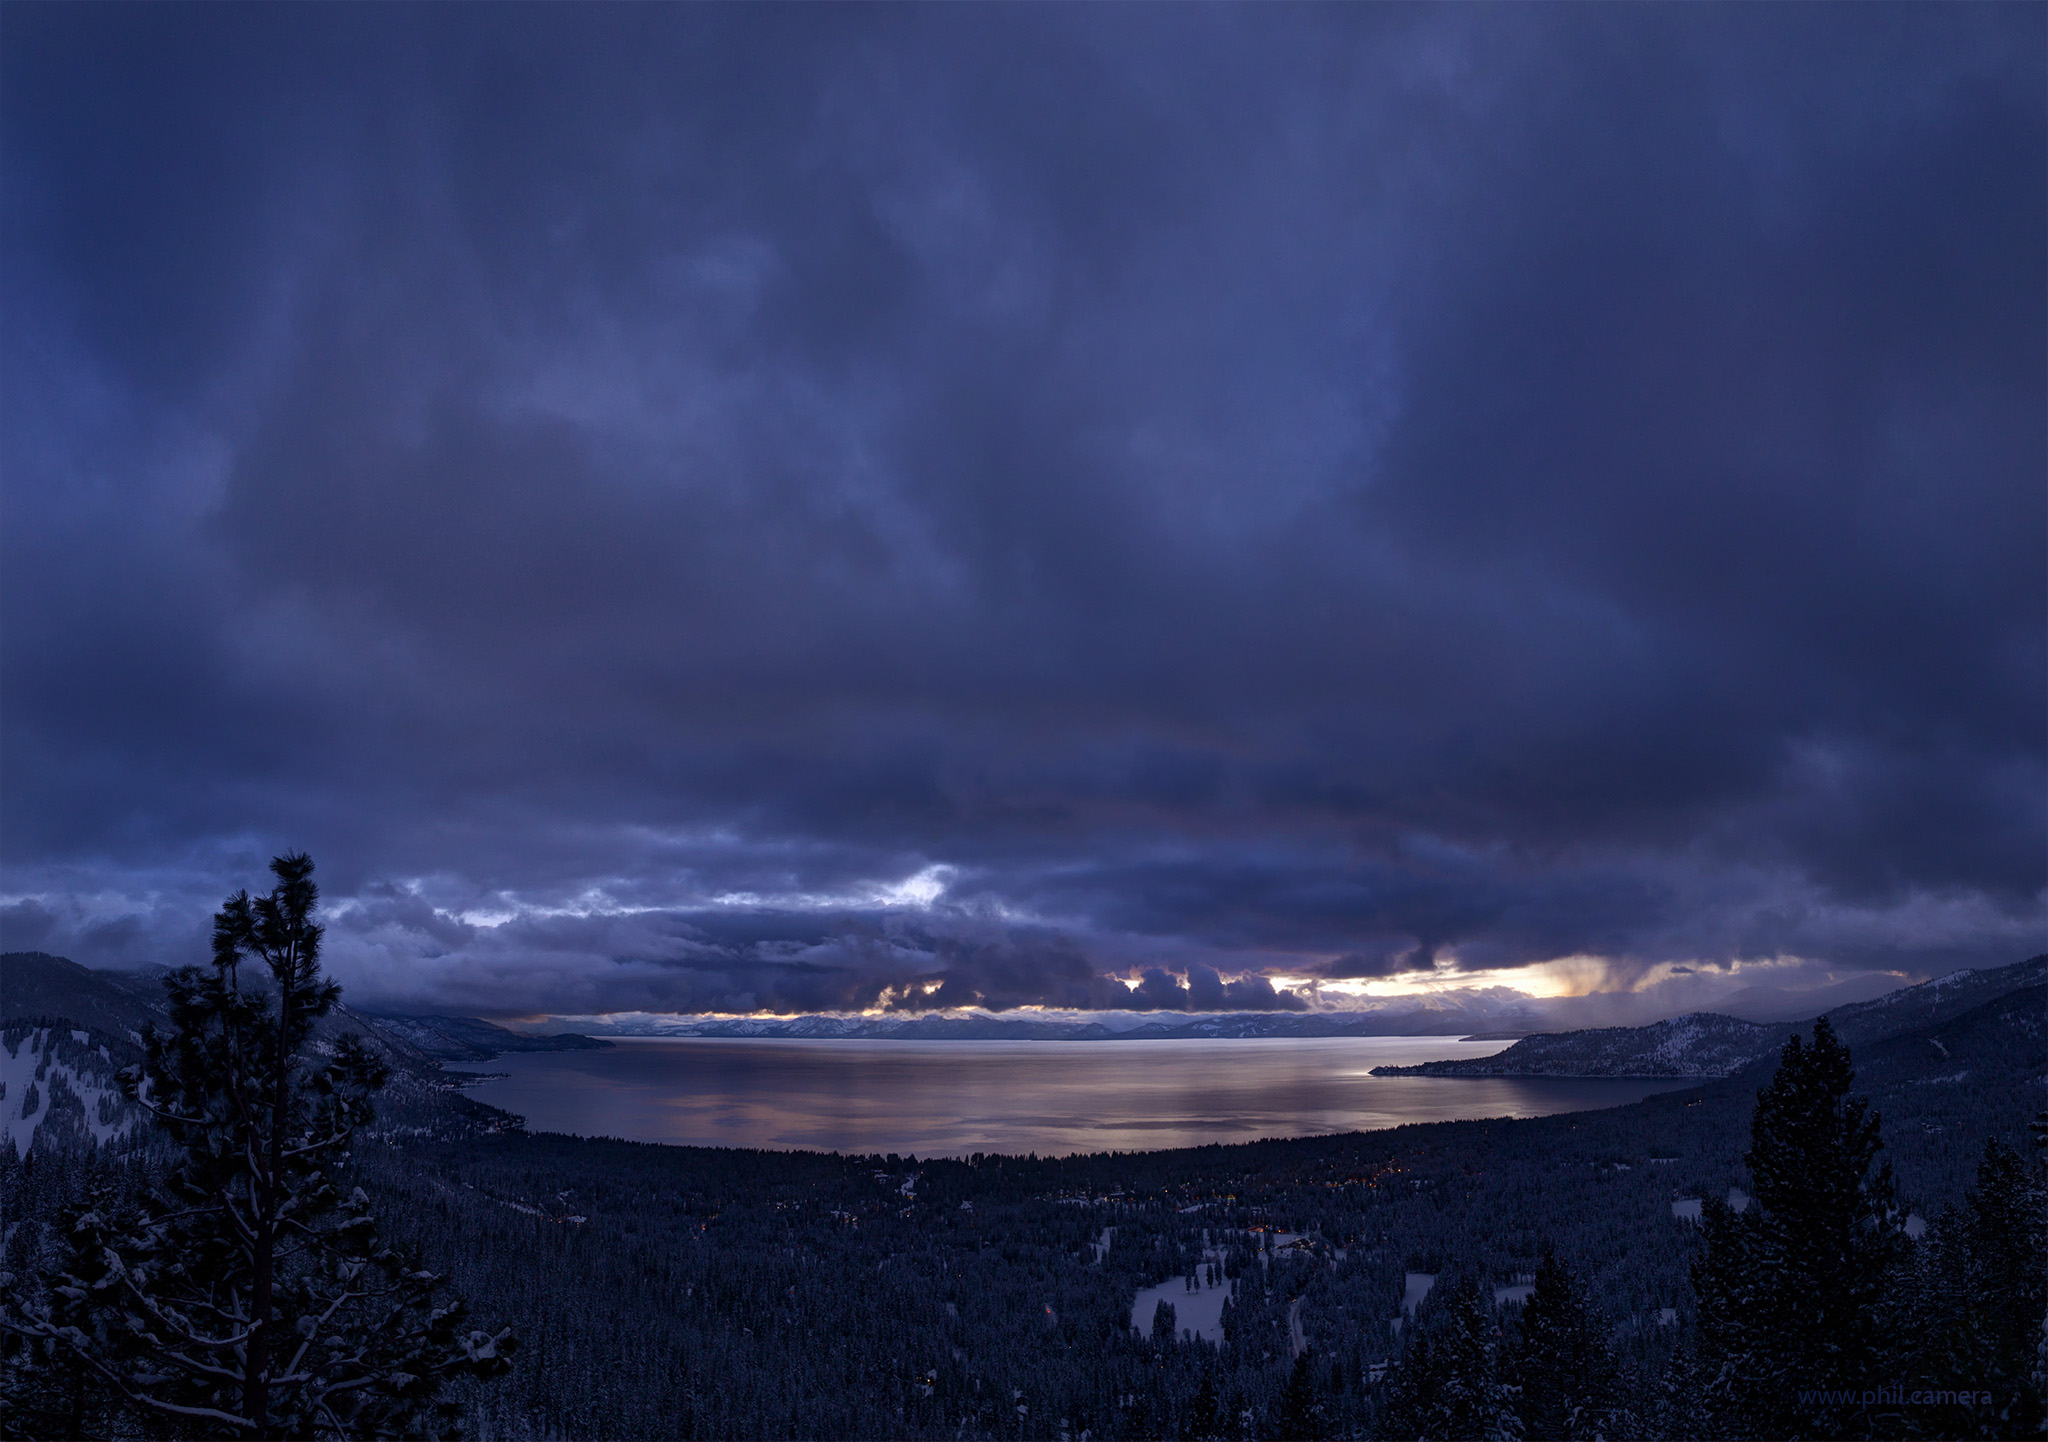 Dramatic clouds over Lake Tahoe